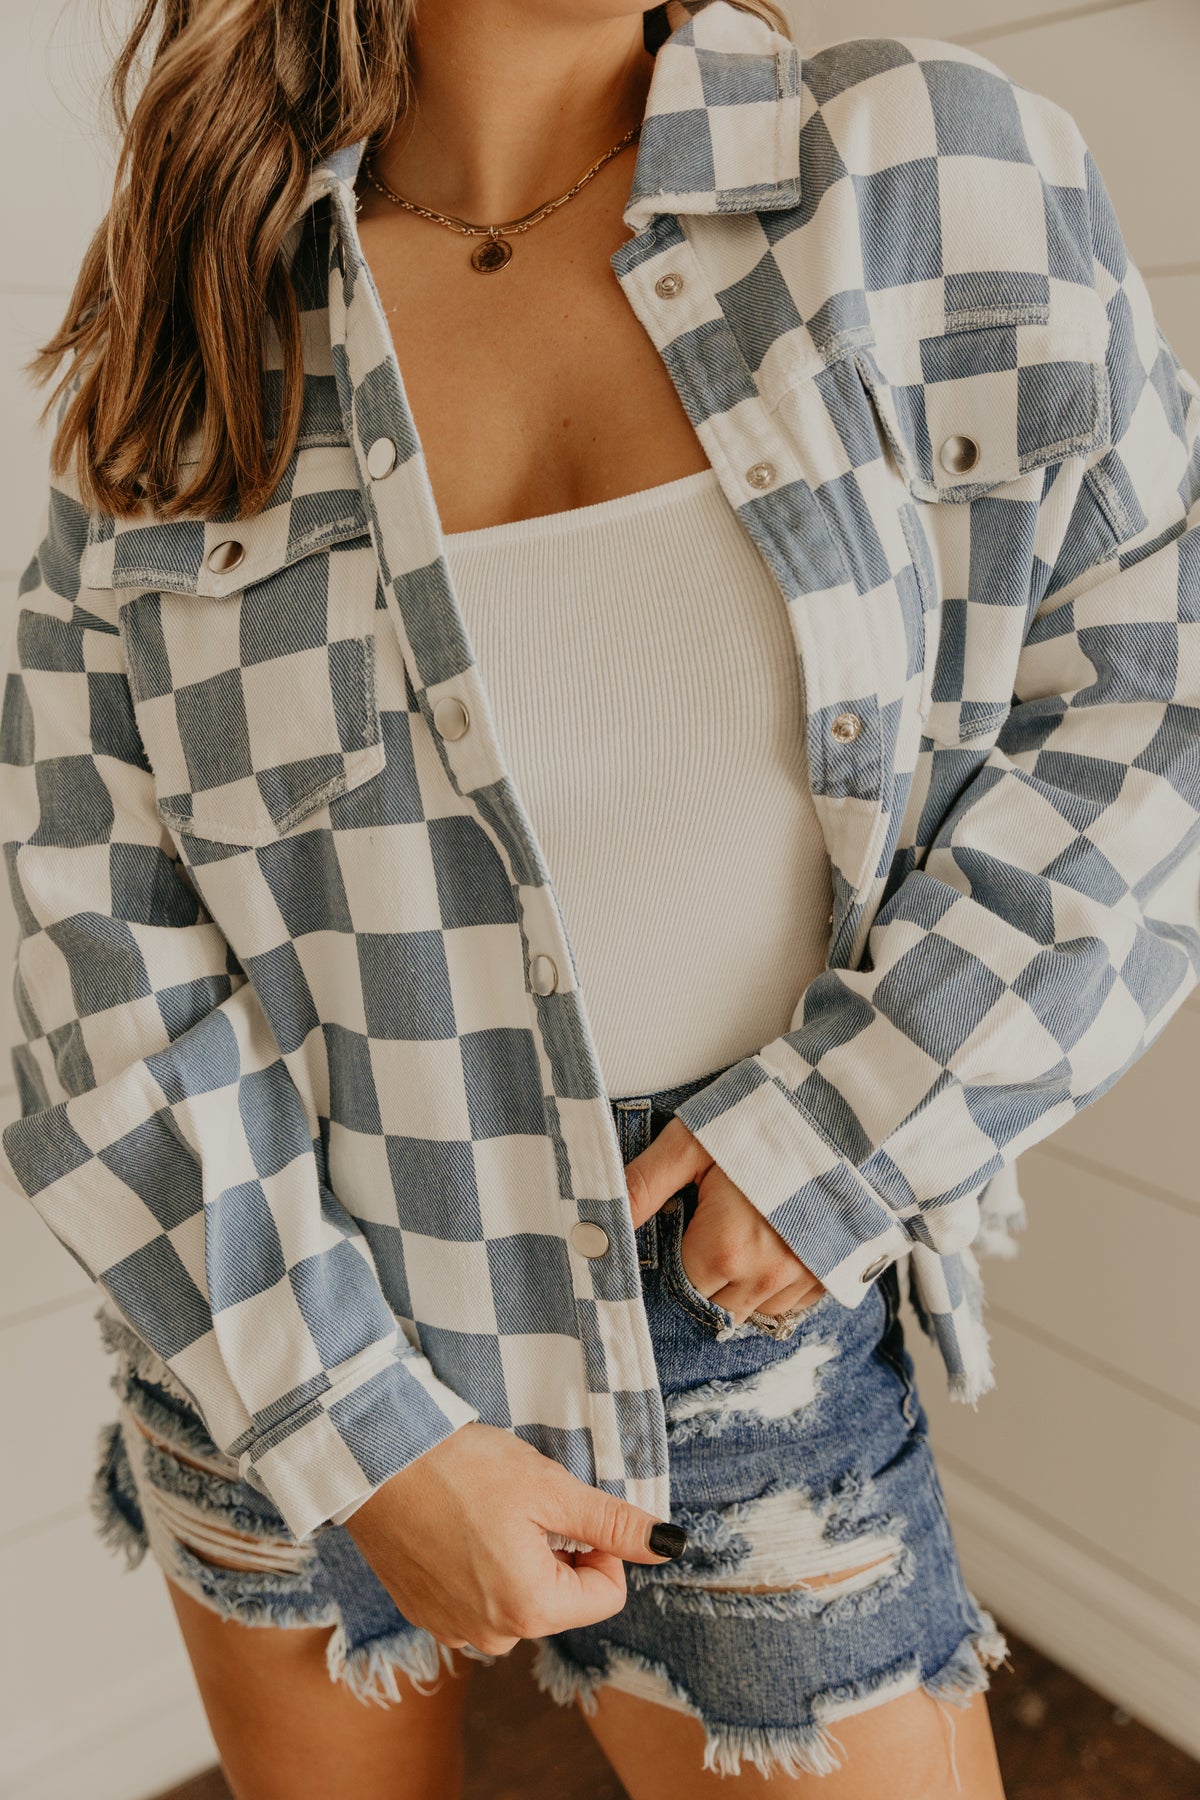 Can't Look Away Checkered Distressed Jacket